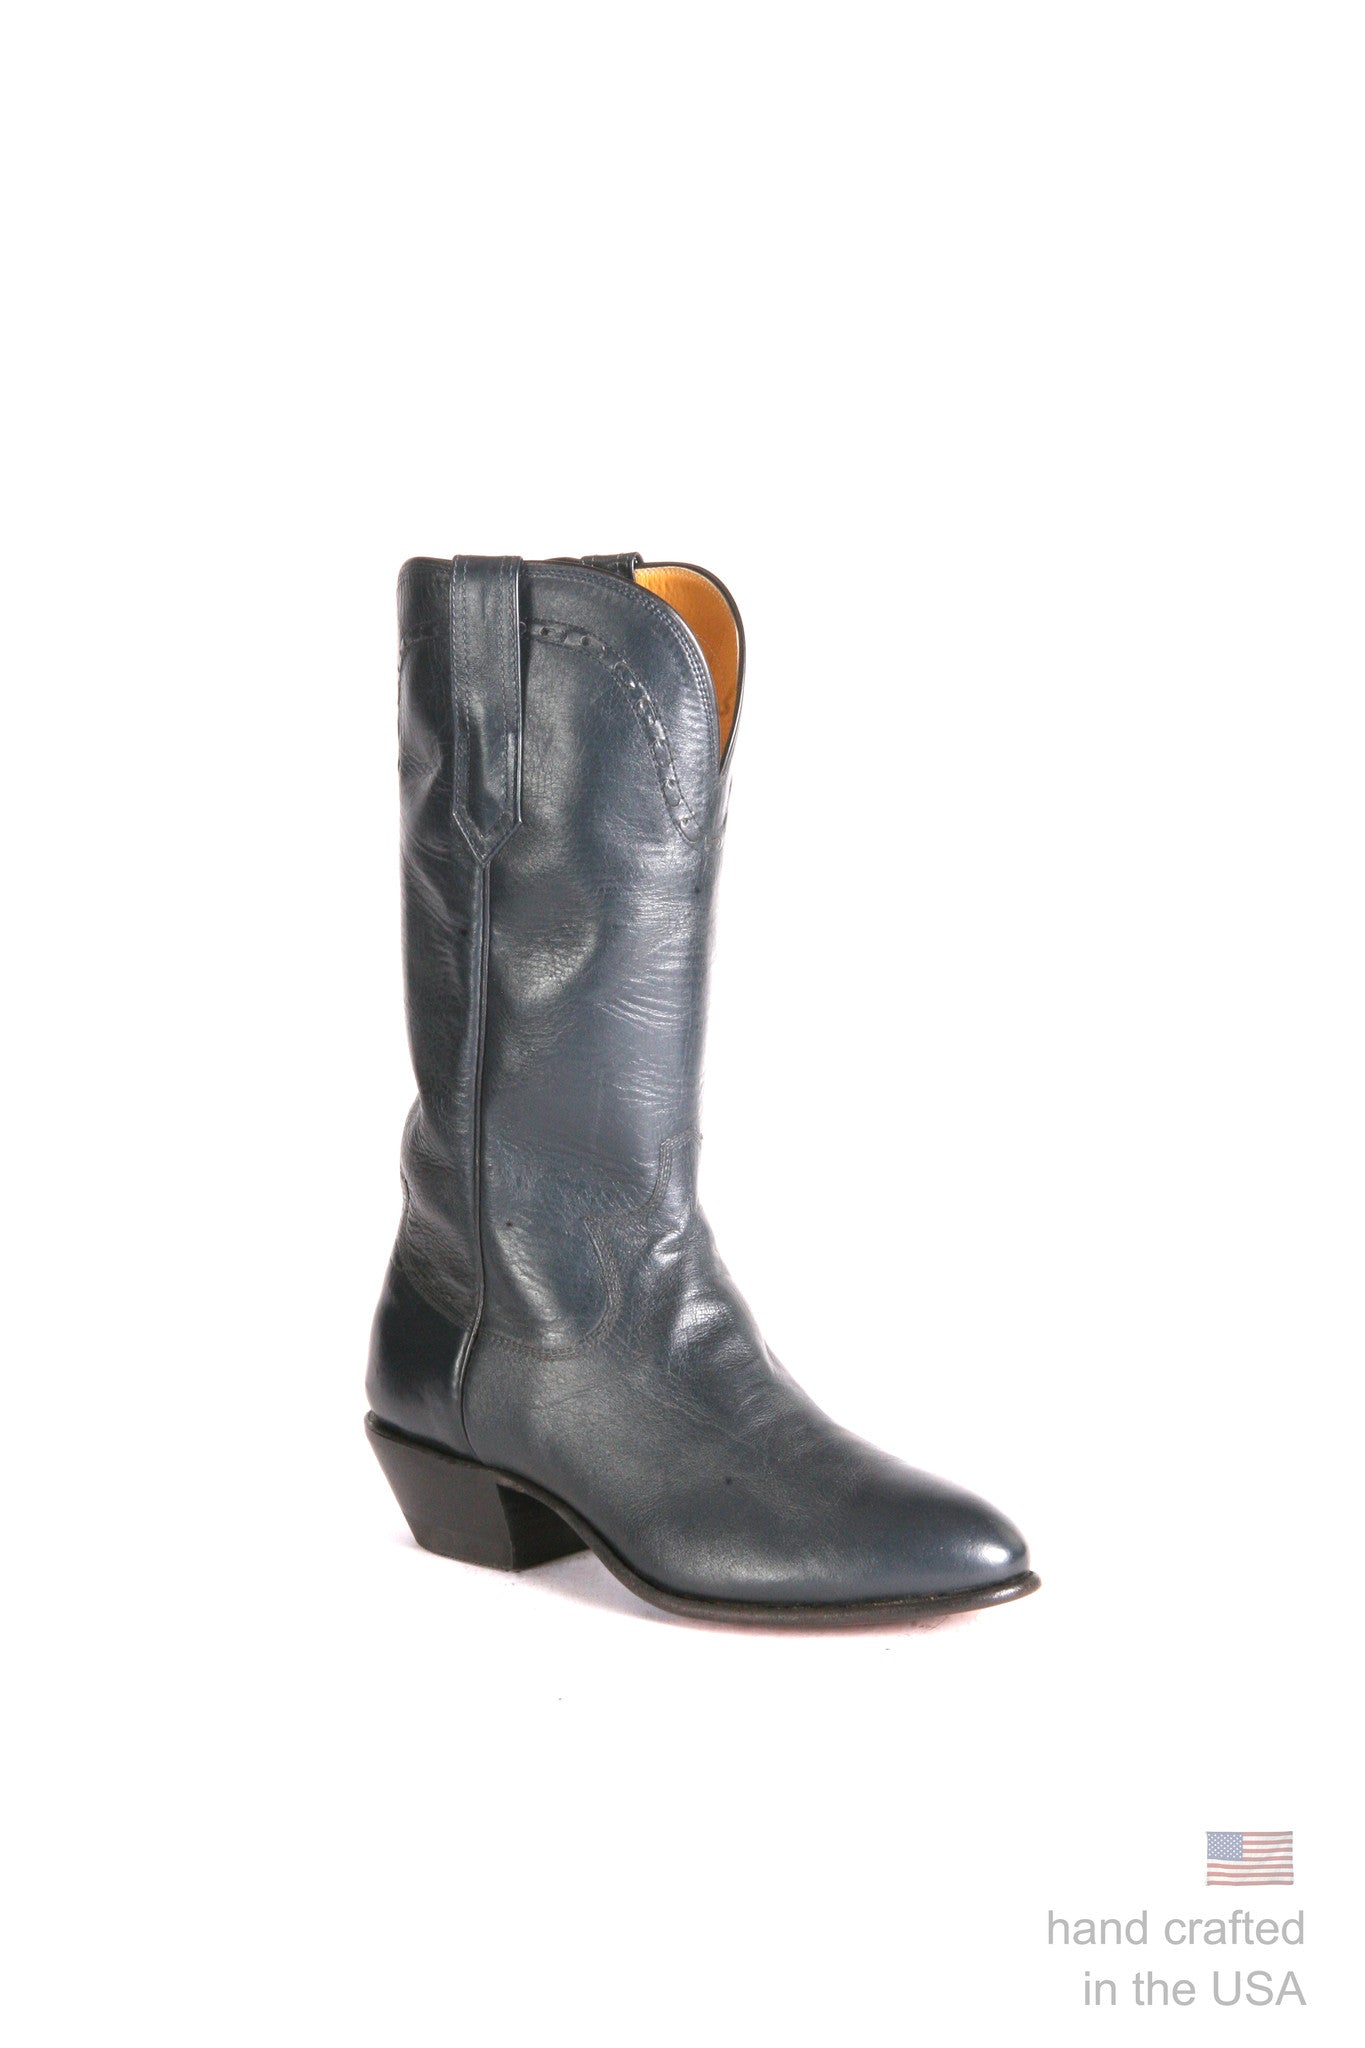 Singles: Boot 0188: Size 7D